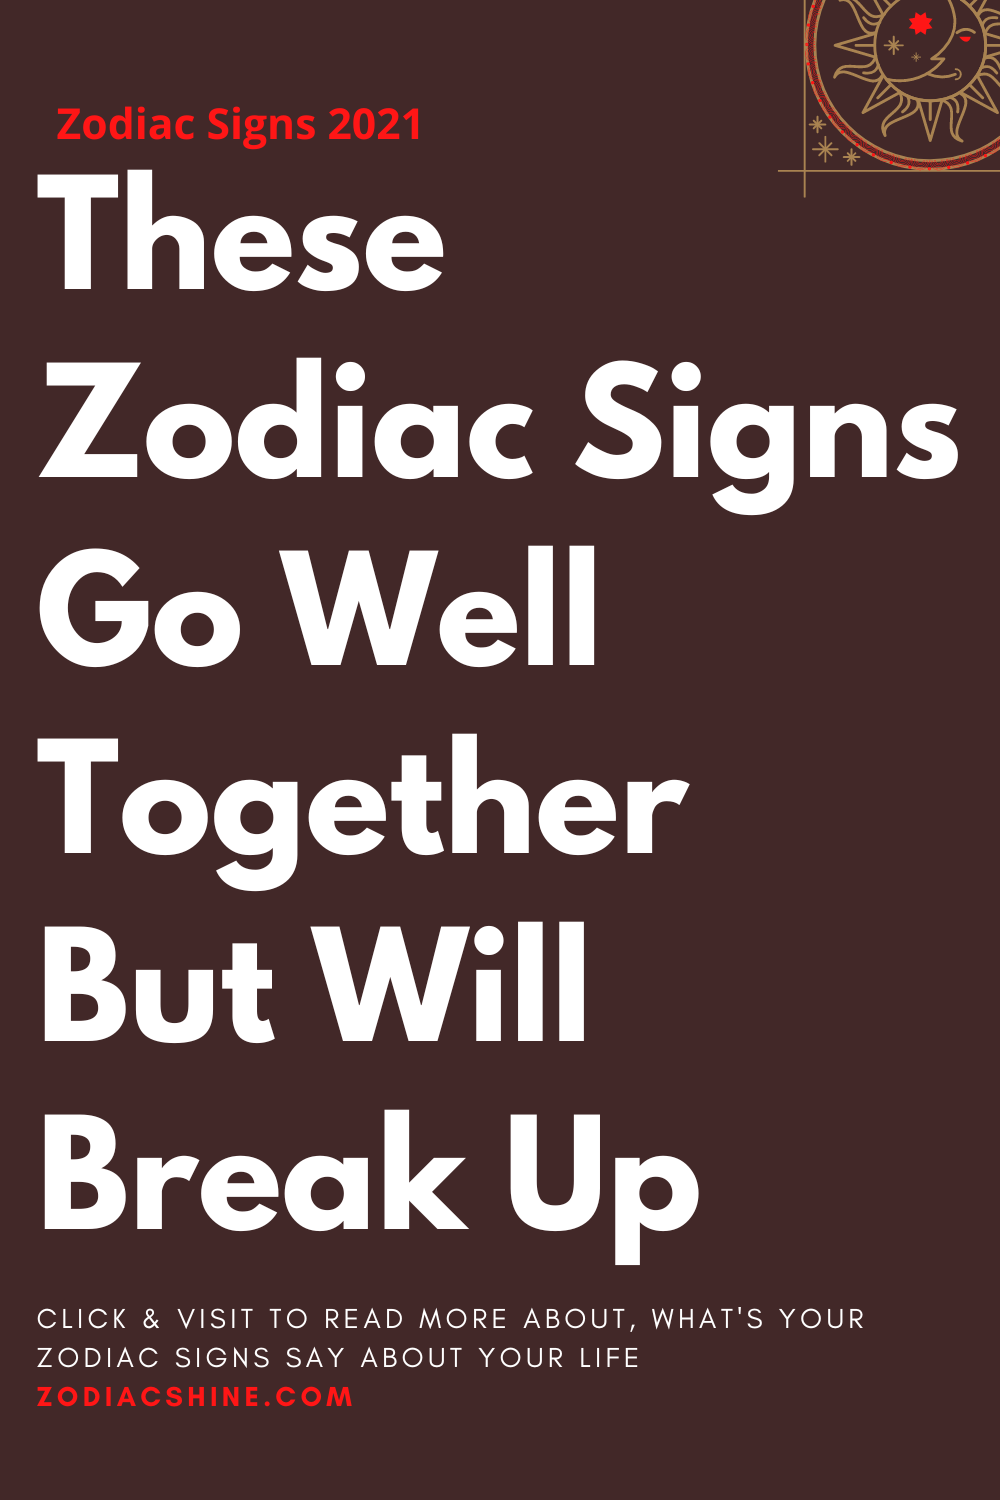 These Zodiac Signs Go Well Together But Will Break Up